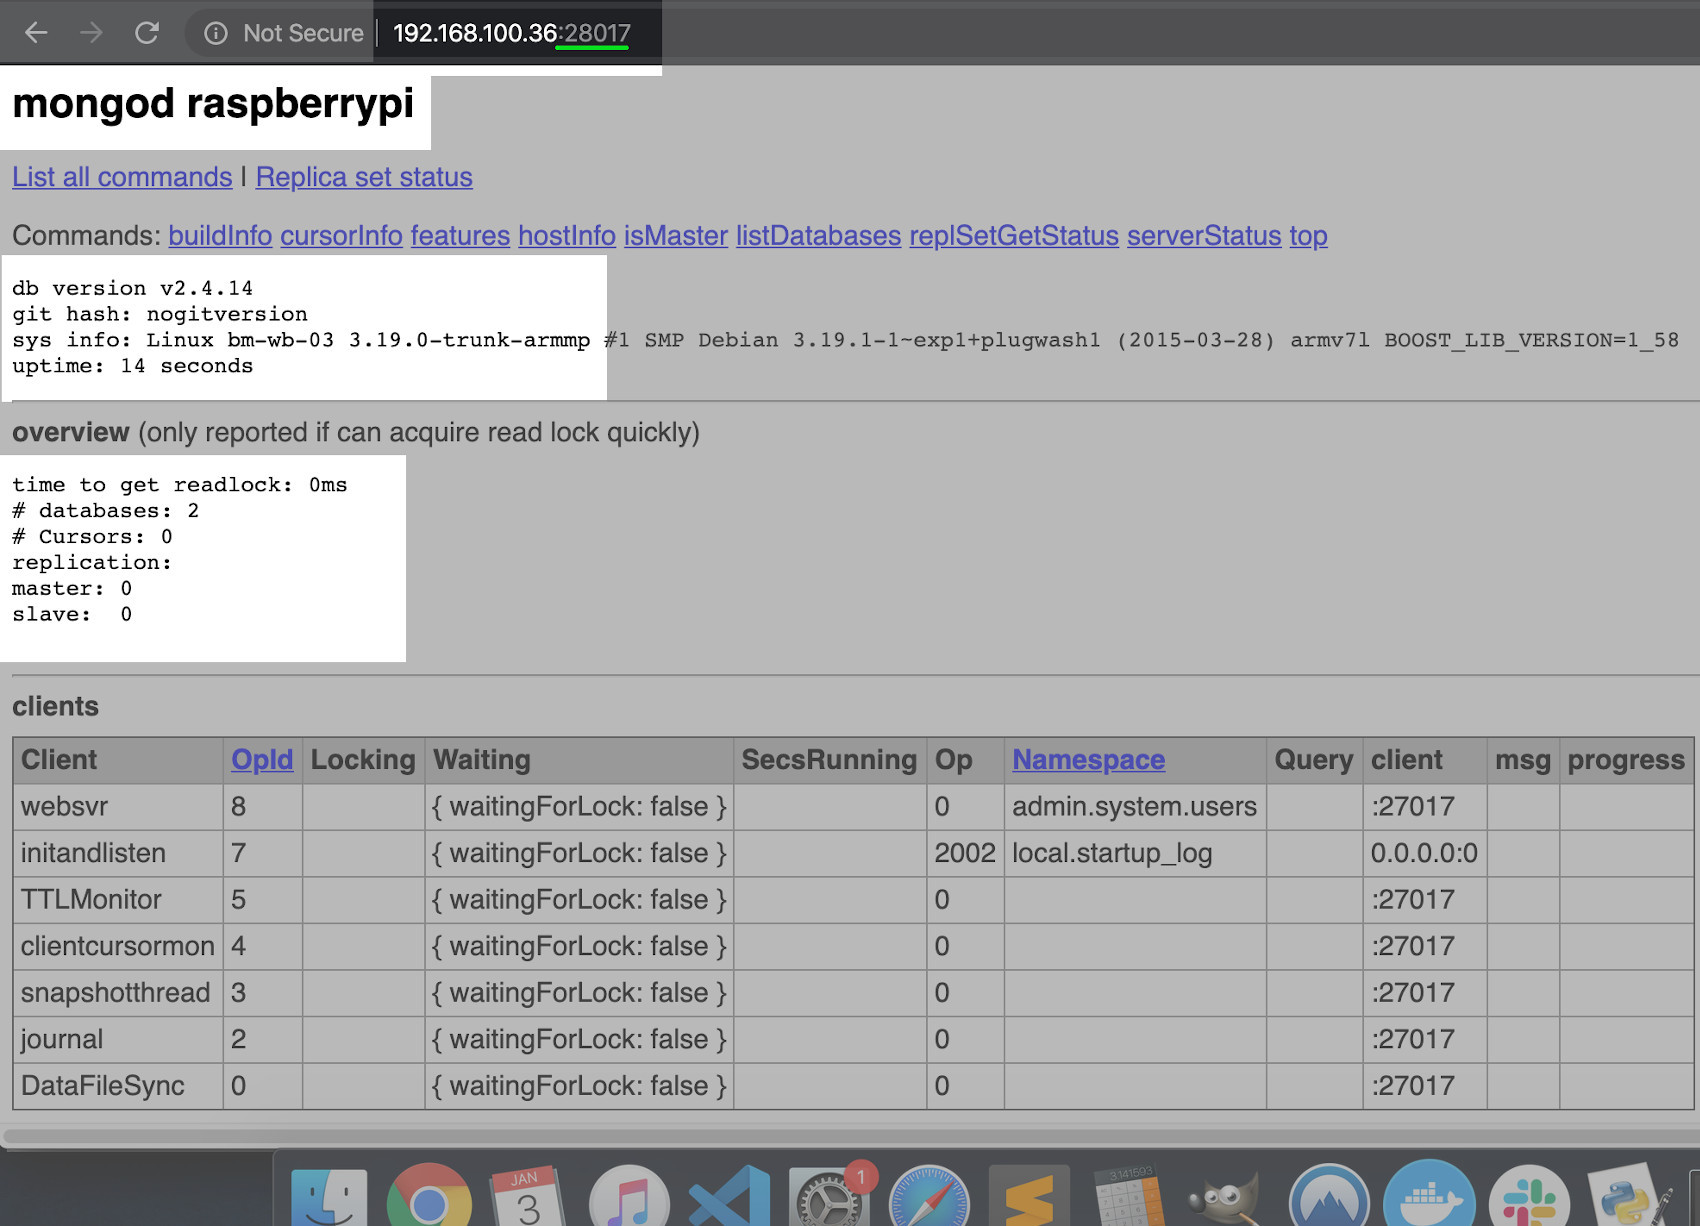 Screenshot of MongoDB from a Raspberry Pi remote access in a browser